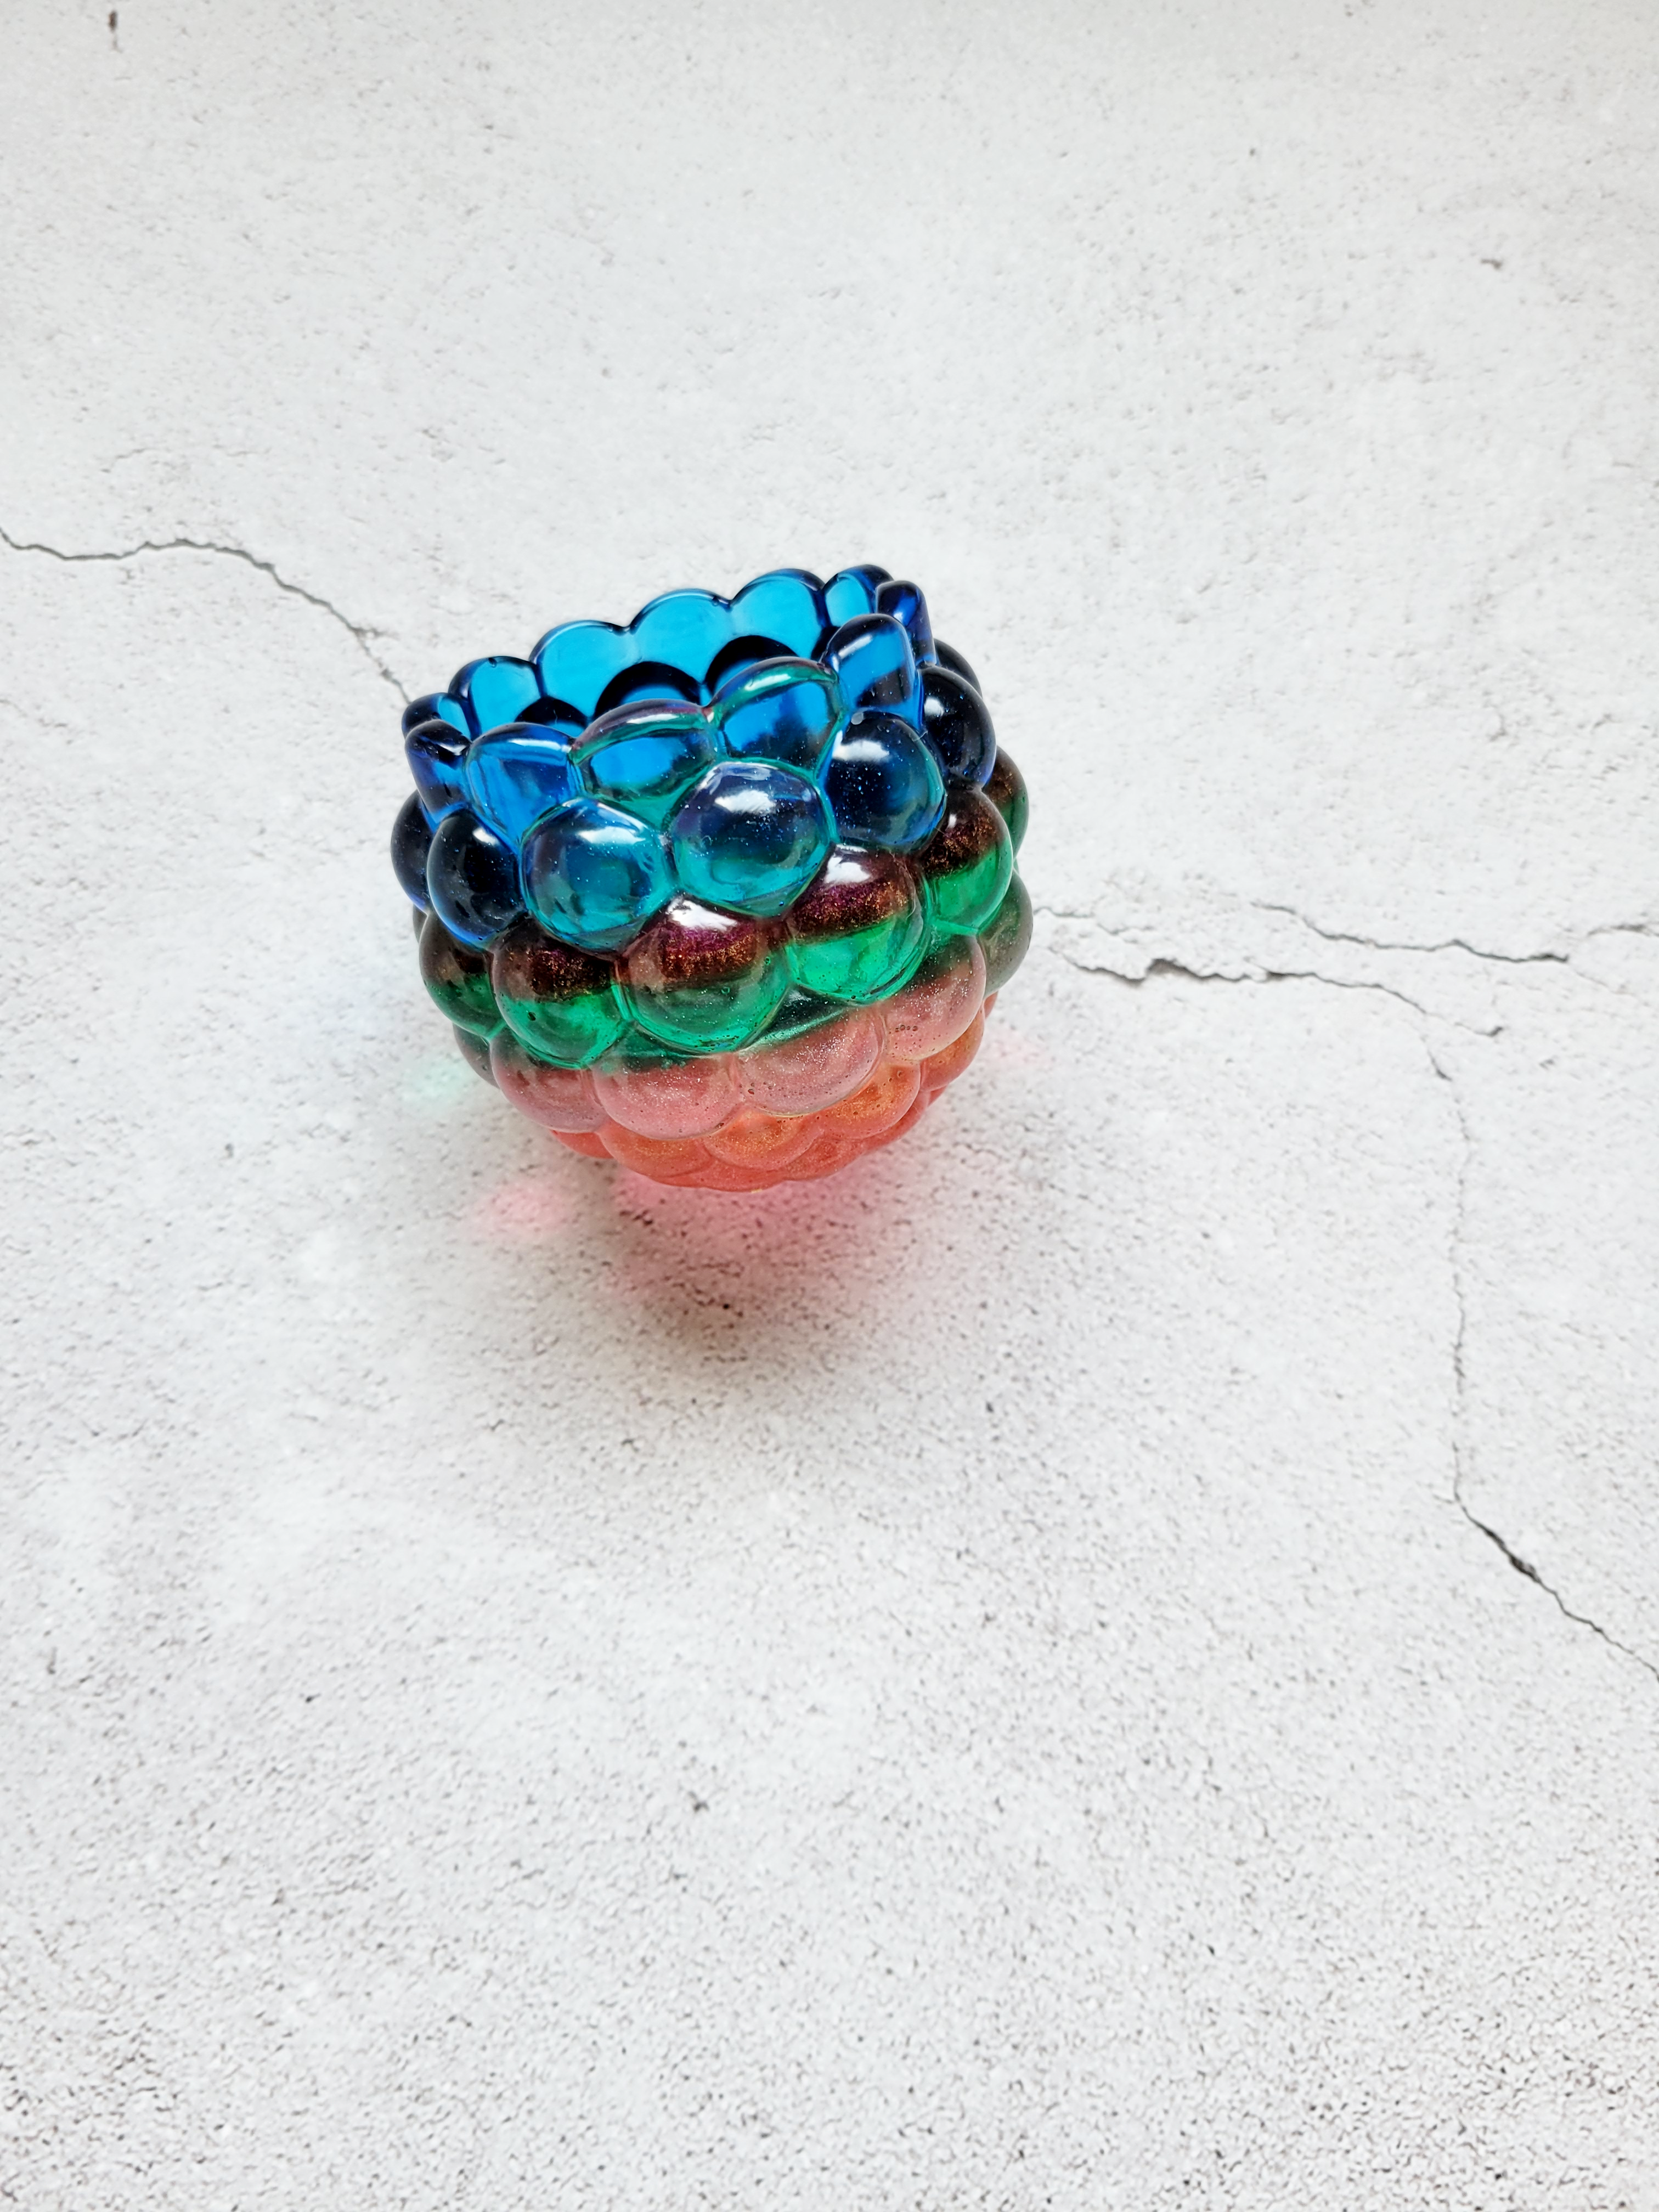 A side view of a tealight candle holder with a bubbled look. It's layered with colors of blue, red, green, orange.